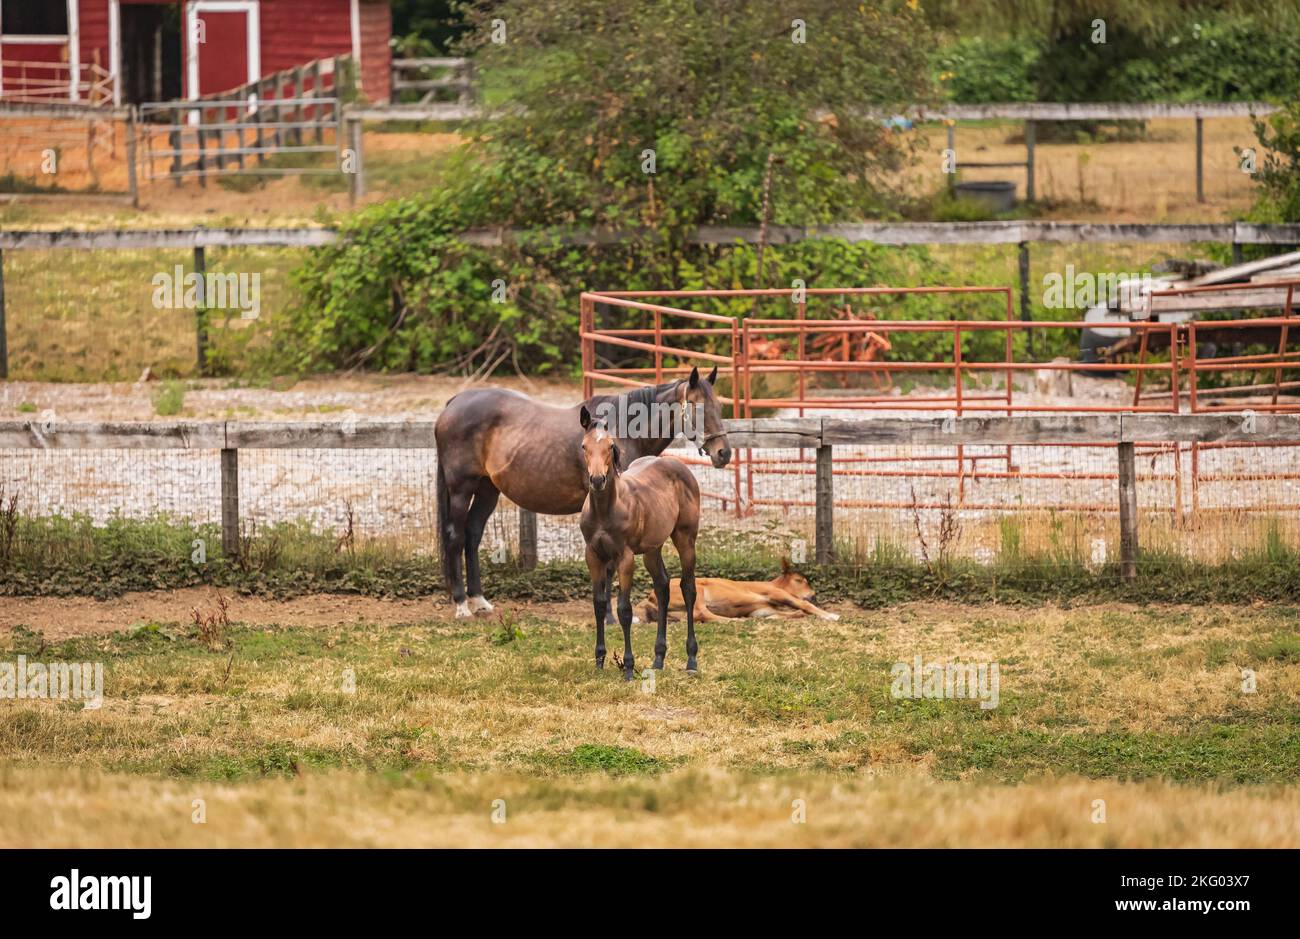 Horses on a farm. Agriculture Landscape With Old Red Barn. Horses in the field. Curious quarter horse foal behind the fence. Nobody, selective focus Stock Photo